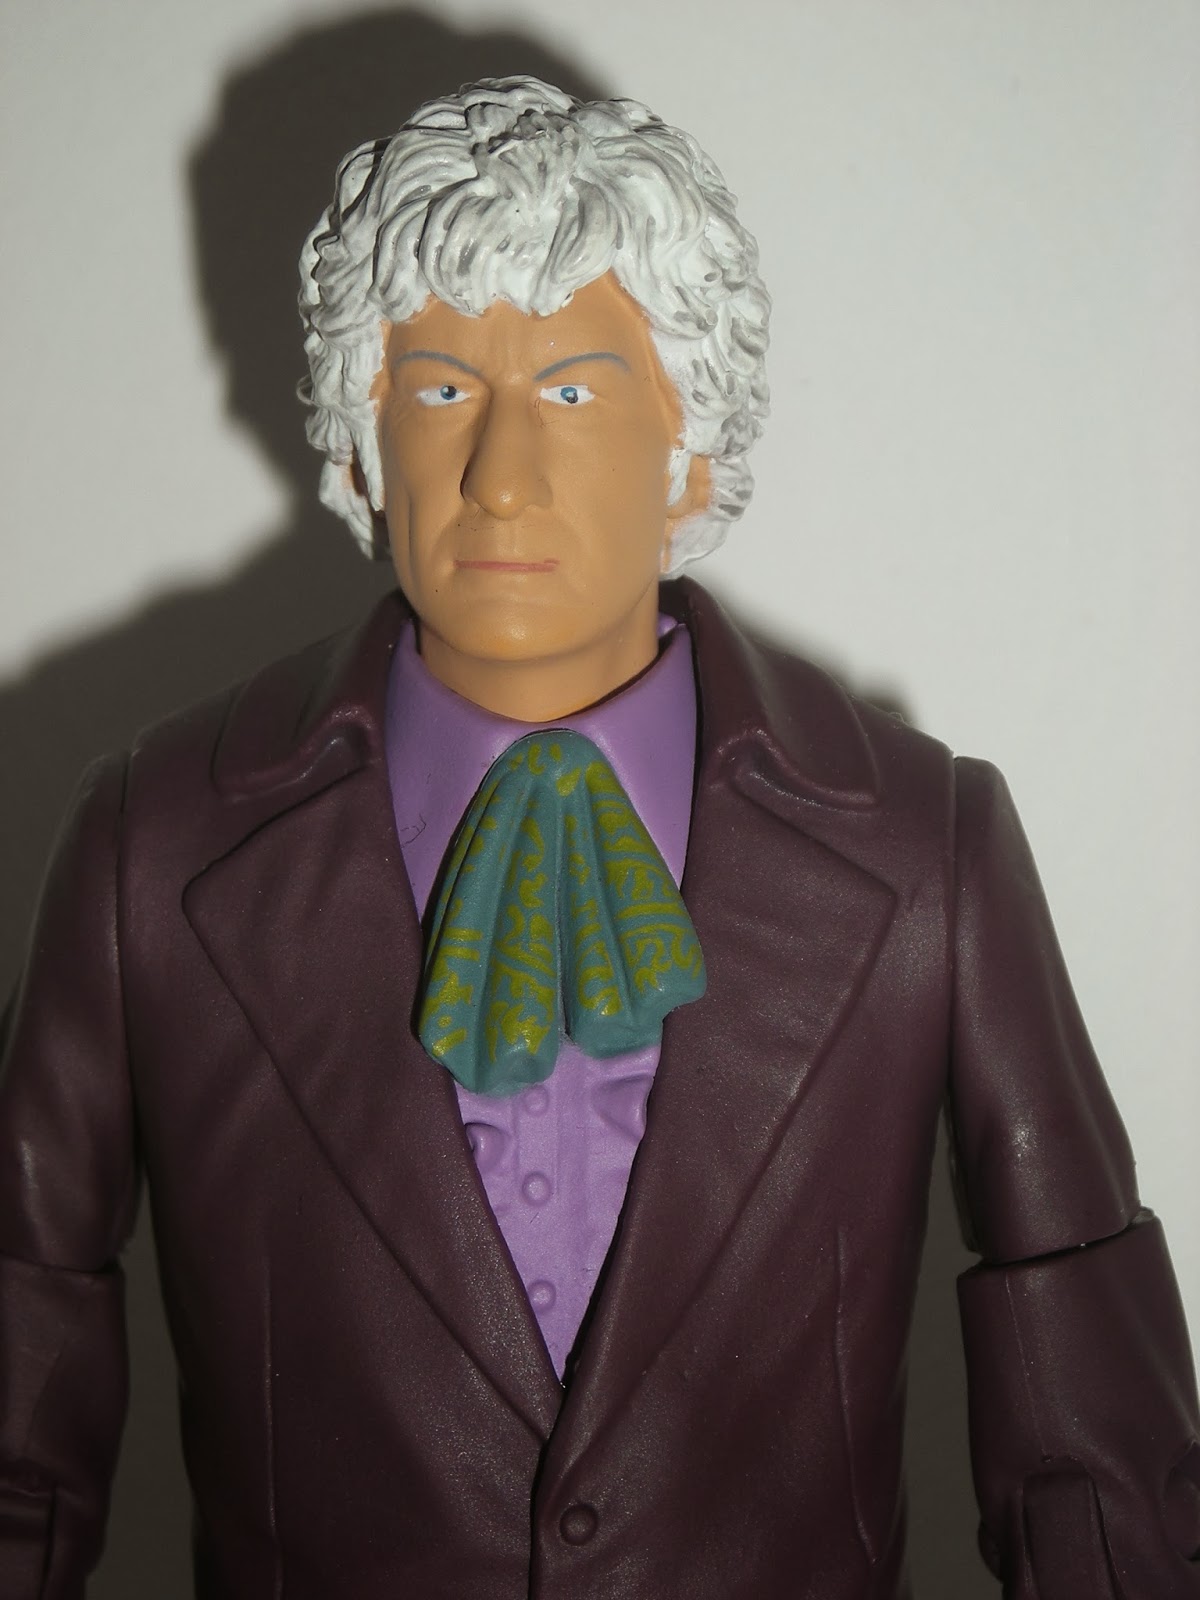 The Third Doctor up close!